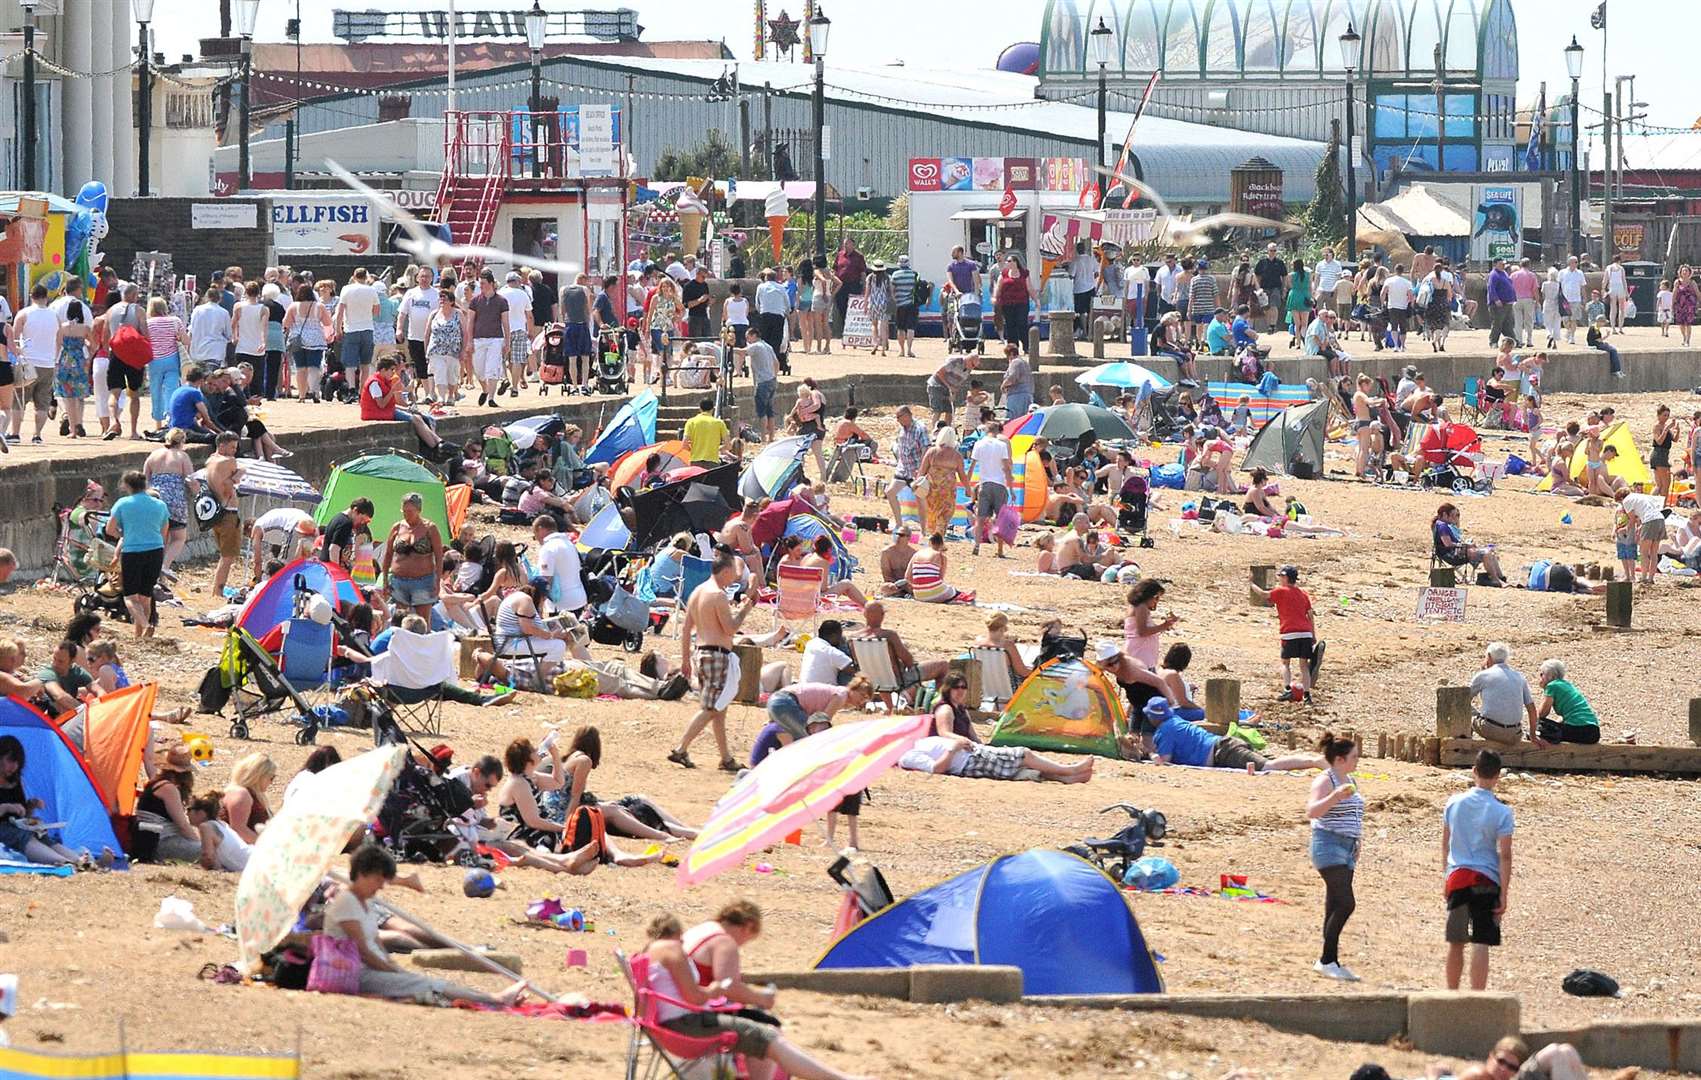 Temperatures are expected to reach 31C in Kent this weekend